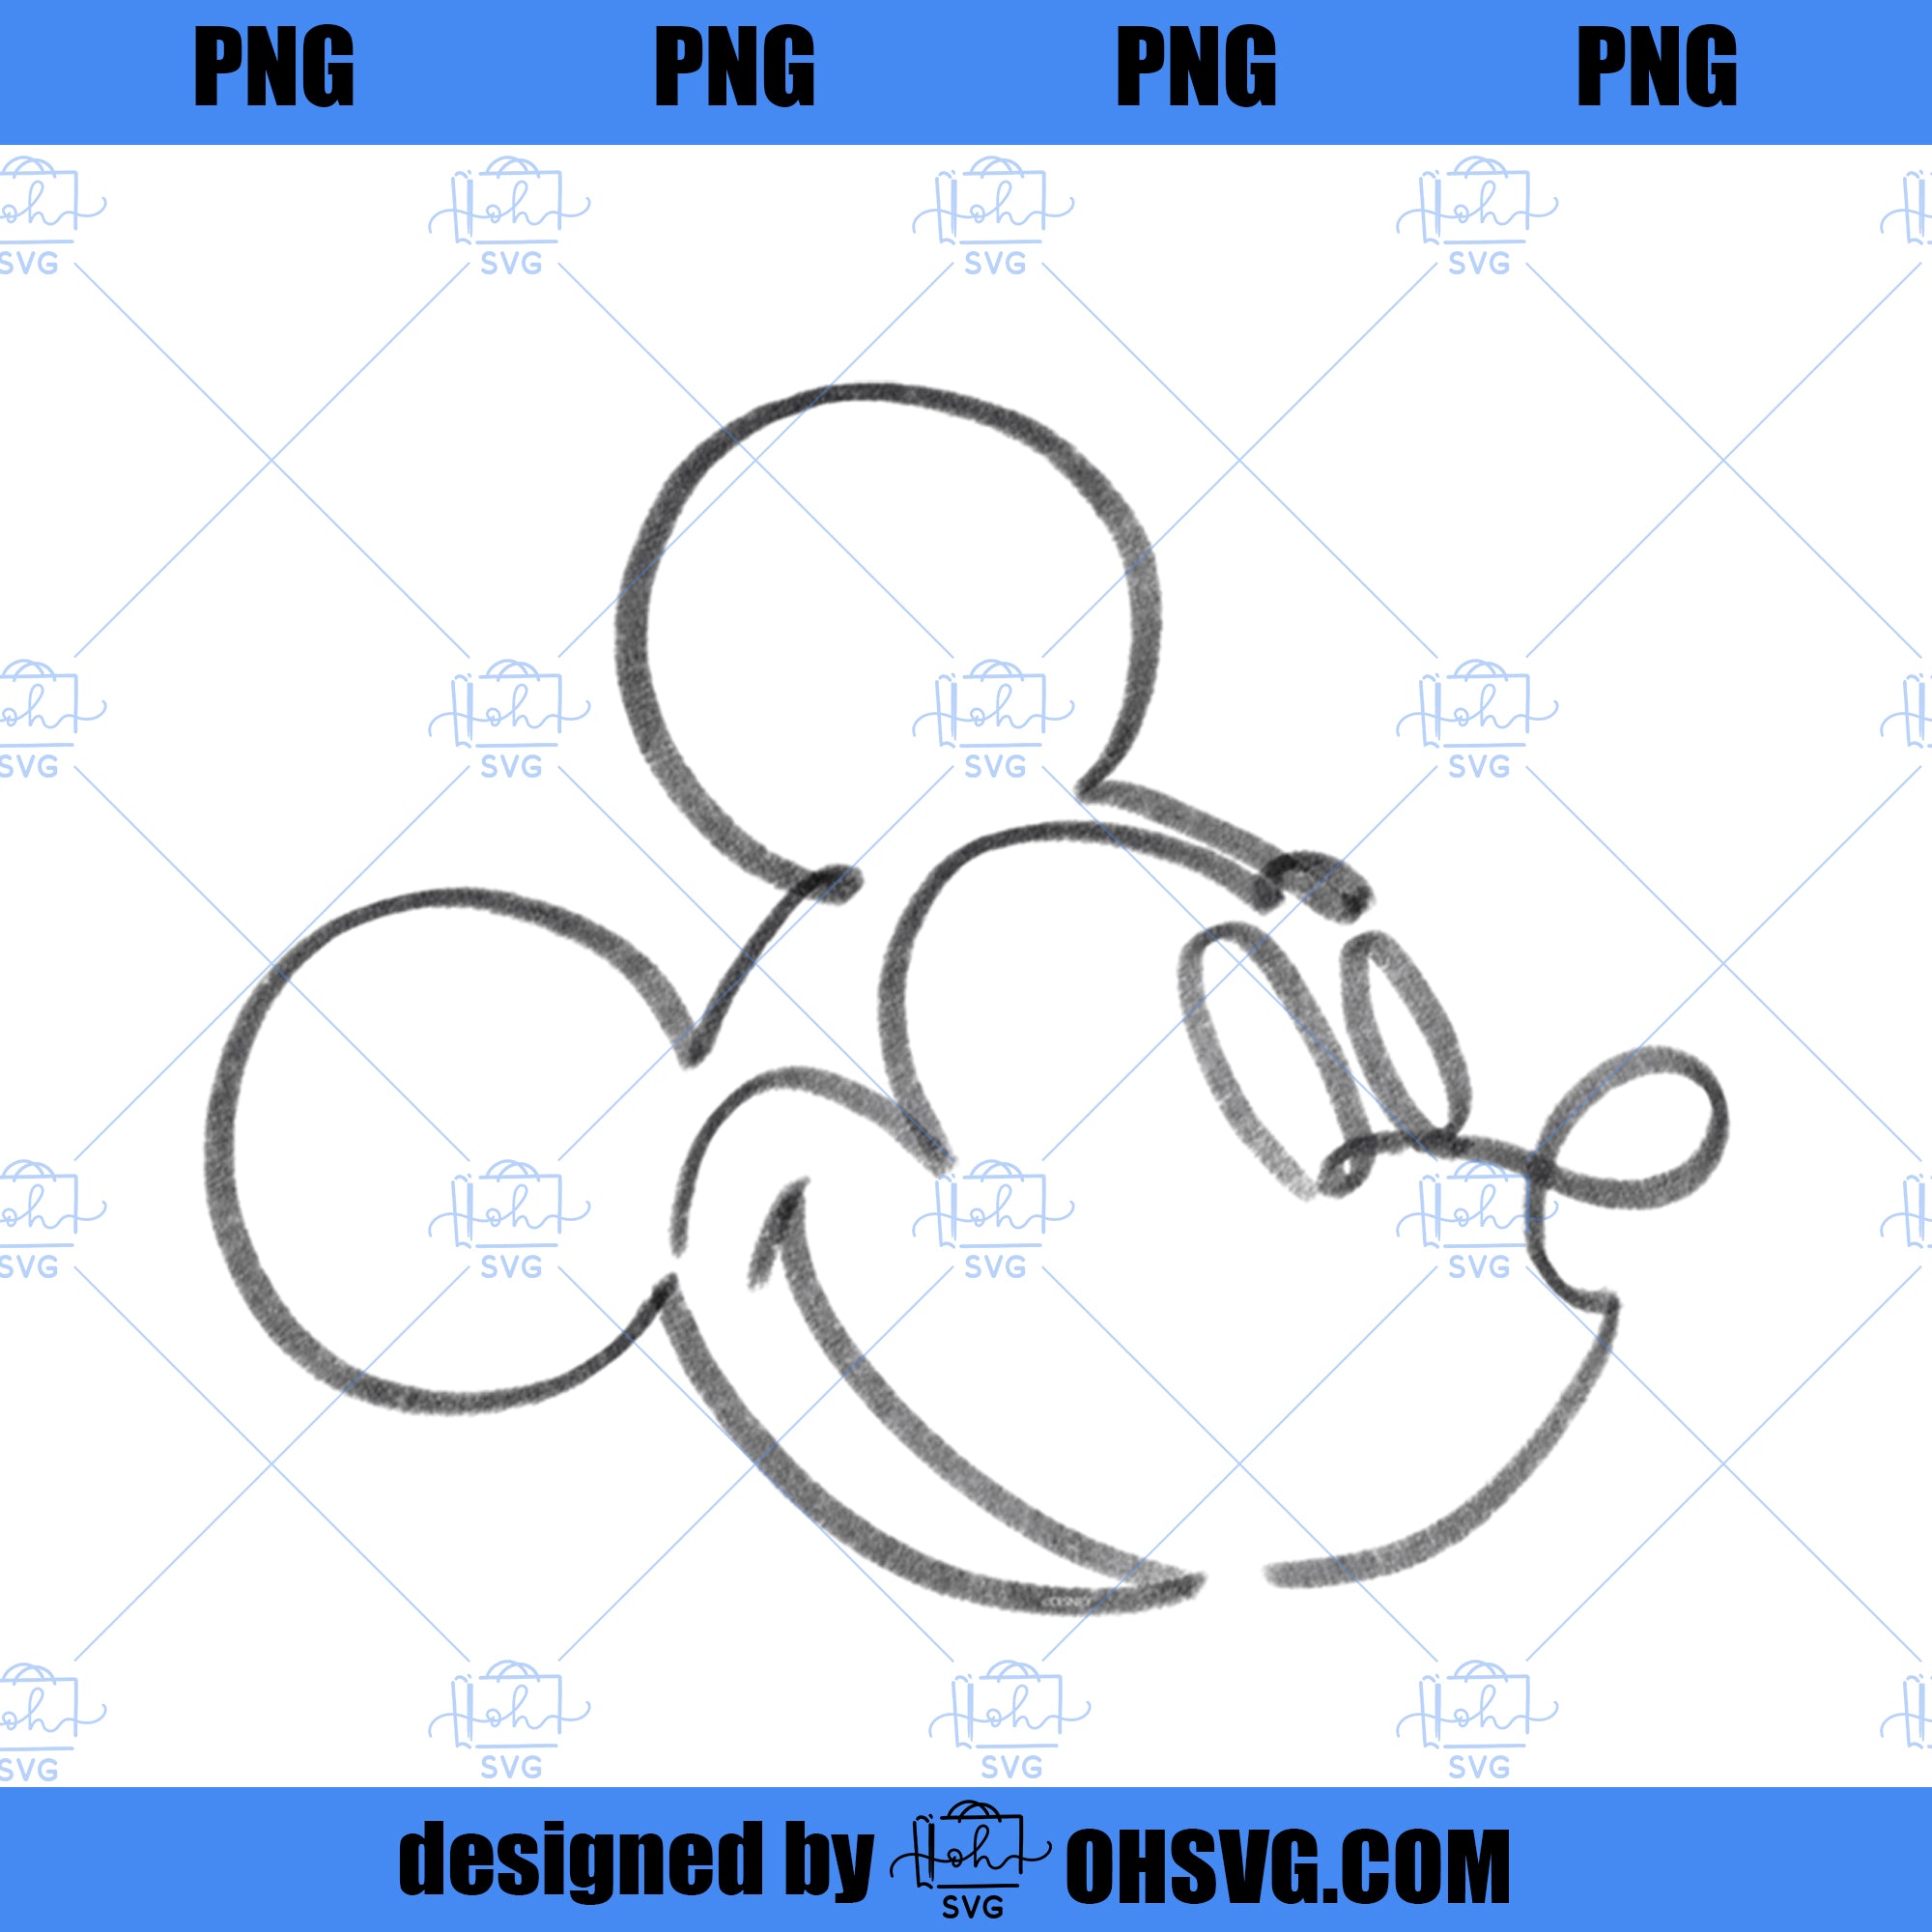 Disney Mickey Mouse Head Artist Pencil Doodle Retro Vintage PNG, Disney PNG, Mickey Friends PNG